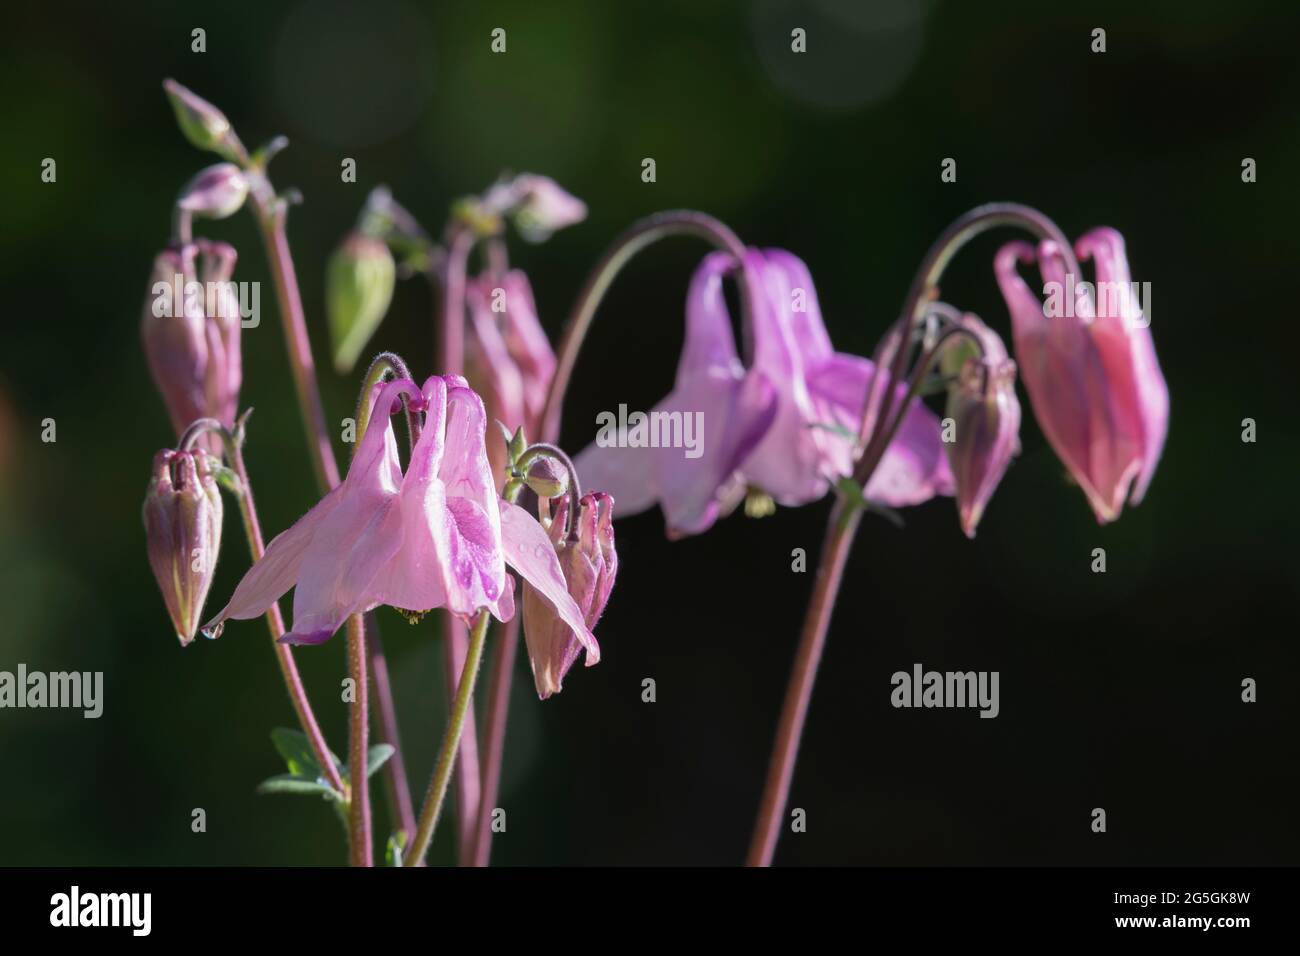 Purple Buds and Flowerheads of Aquilegia Vulgaris (Columbine, or Granny's Bonnet) in Detail Stock Photo